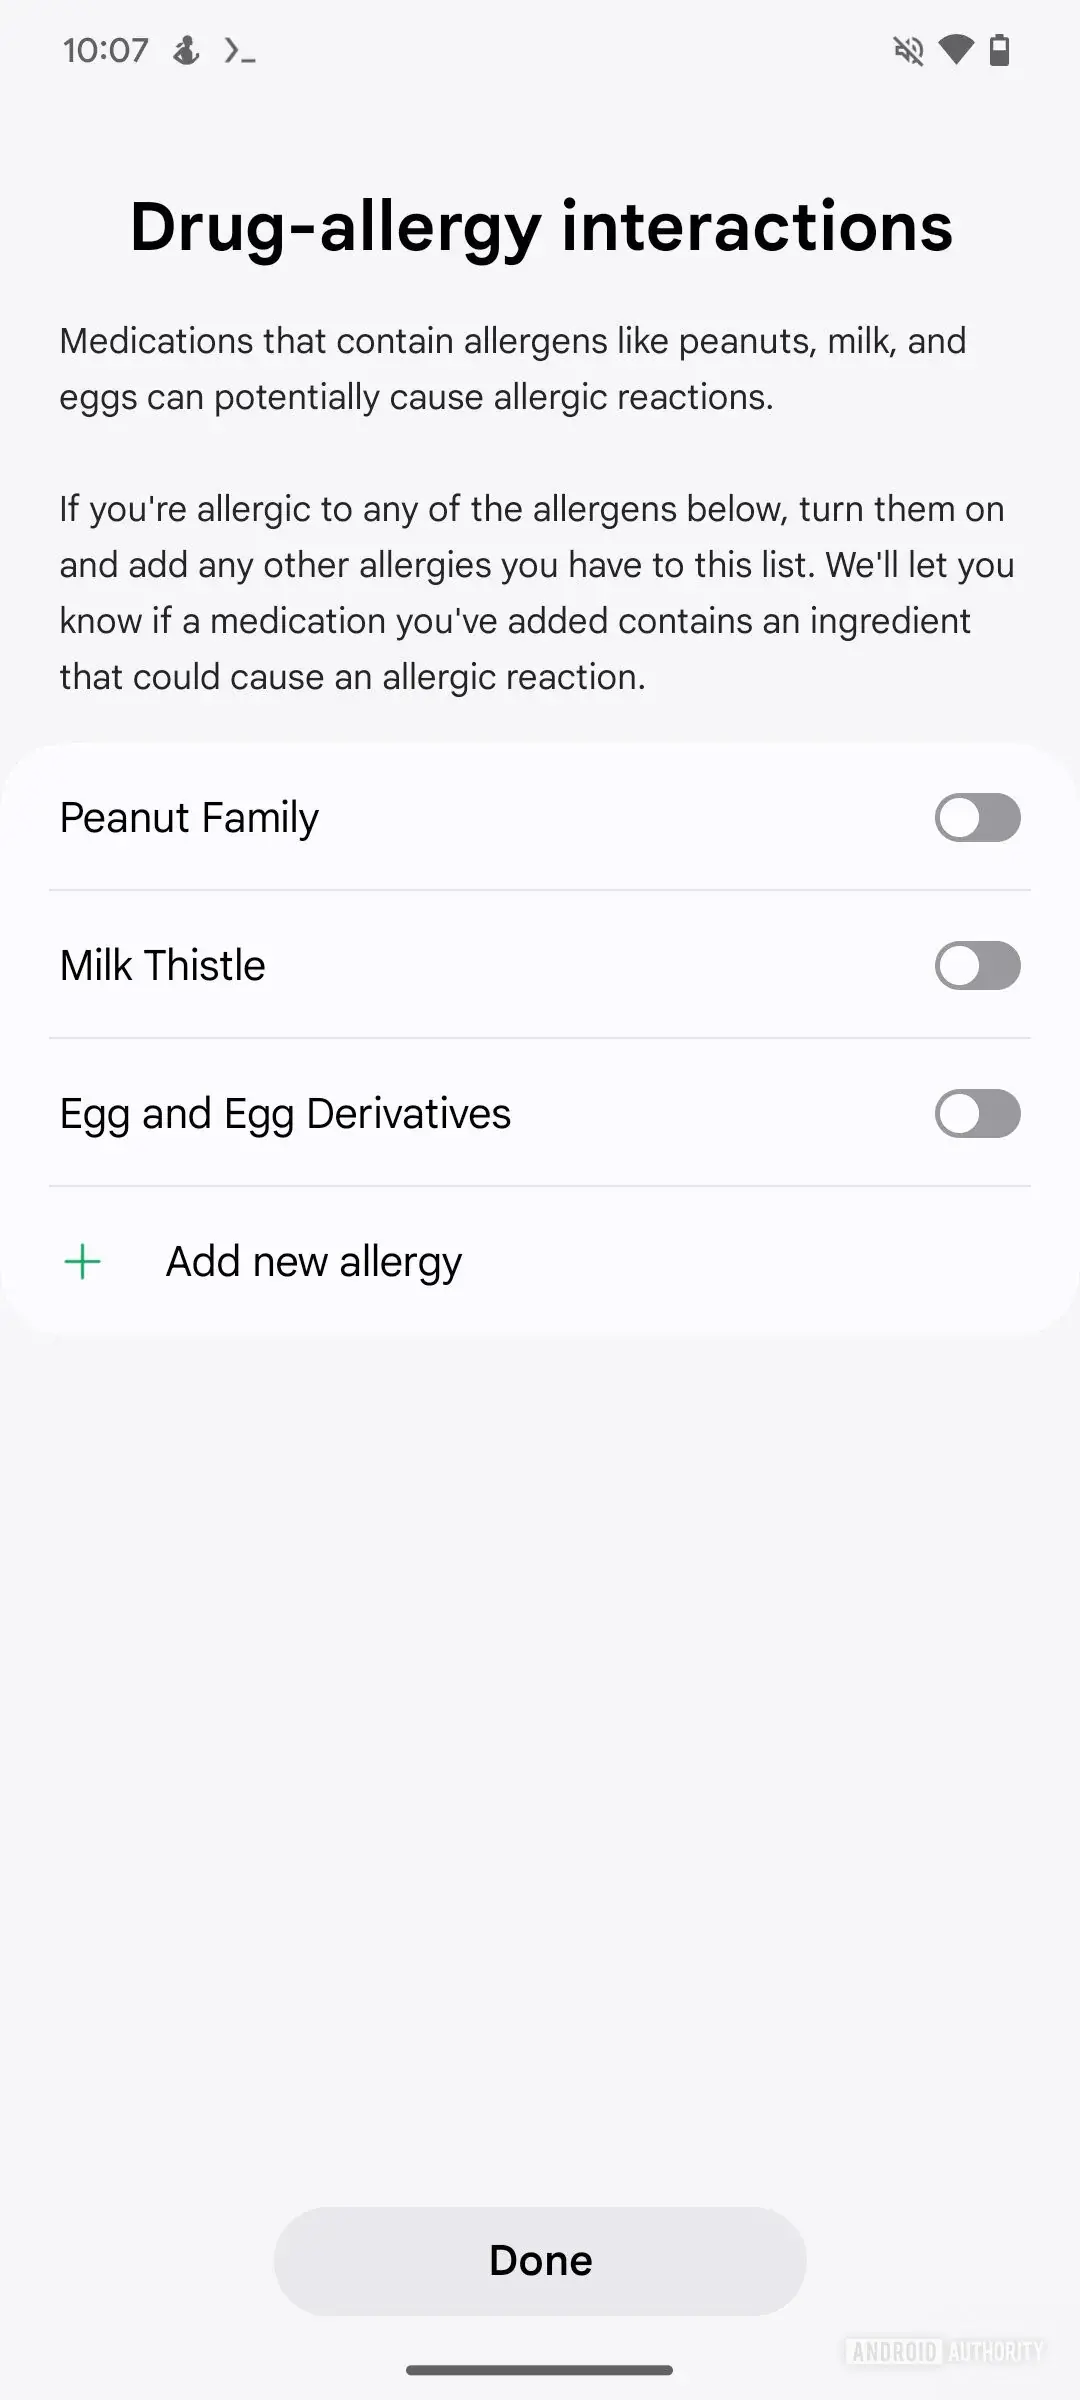 Image Source - Android Authority - Samsung Health may add two useful medicine-related features in a future update